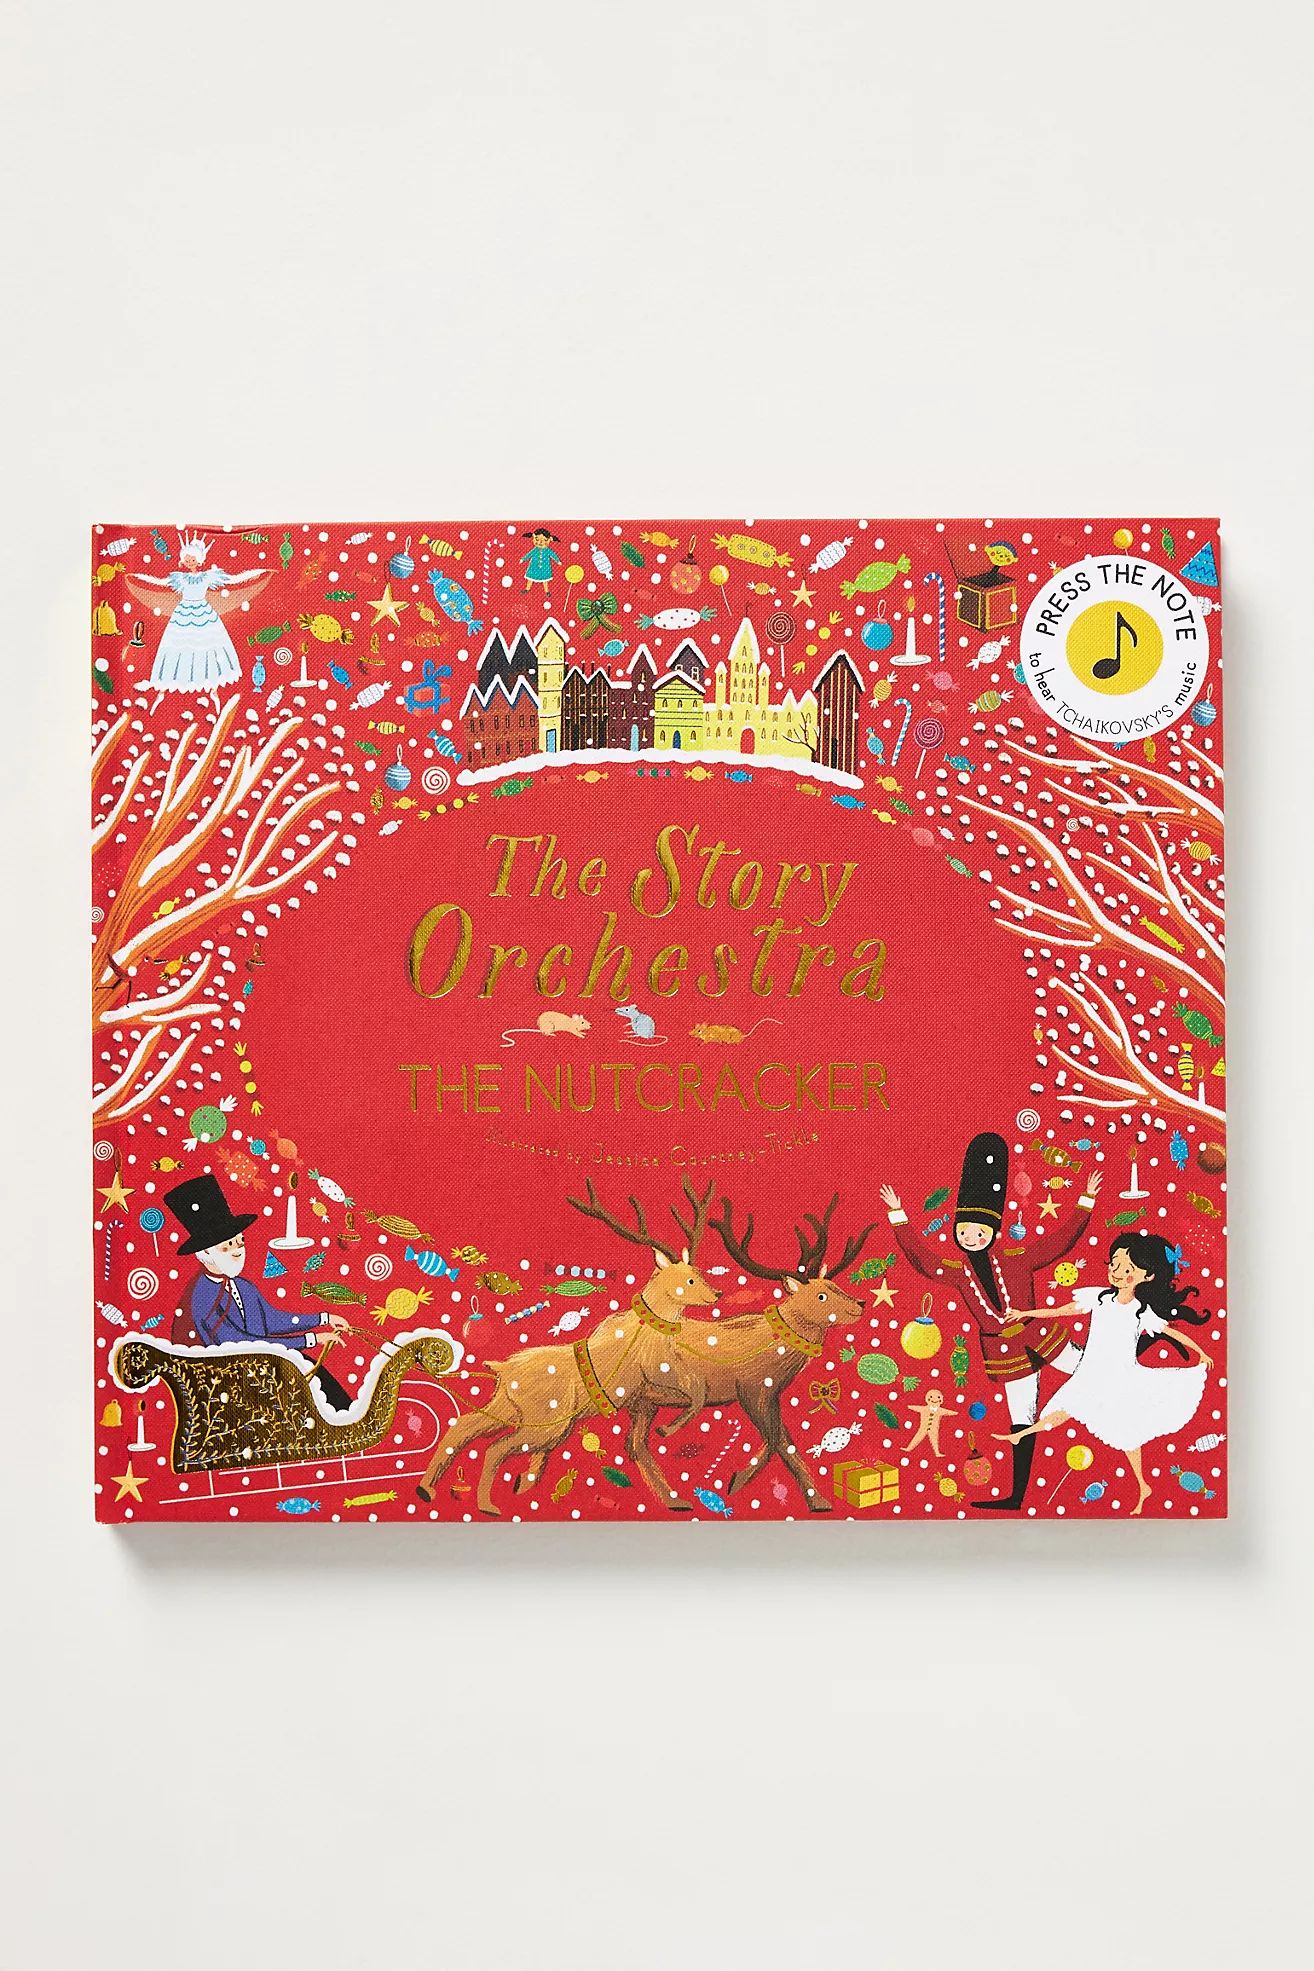 The Story Orchestra: The Nutcracker | Anthropologie (US)